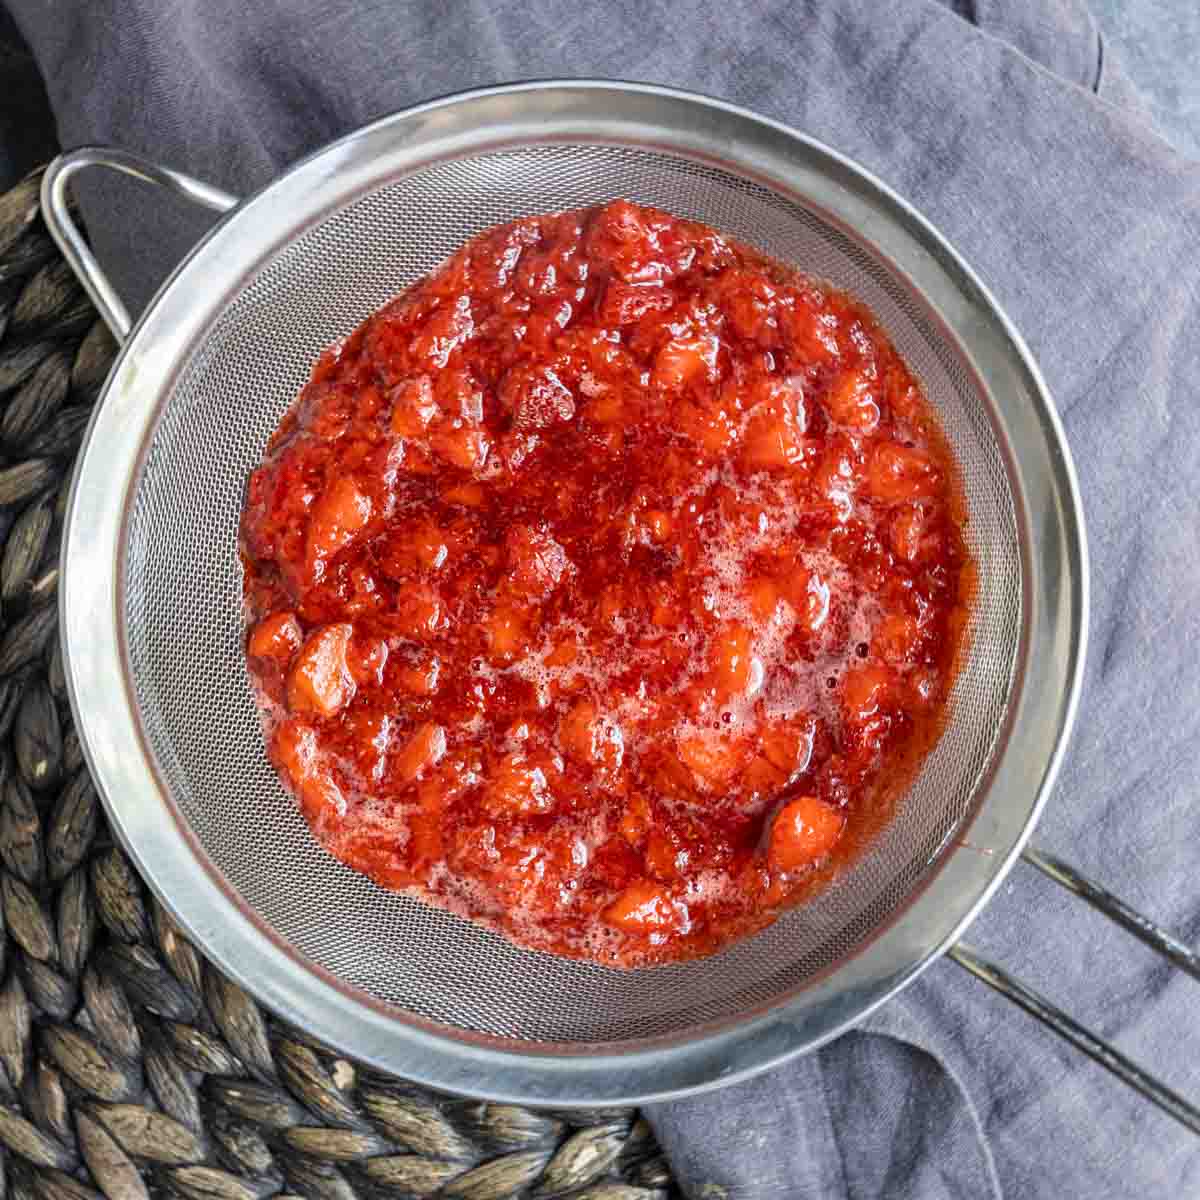 straining Strawberry Coulis through a strainer